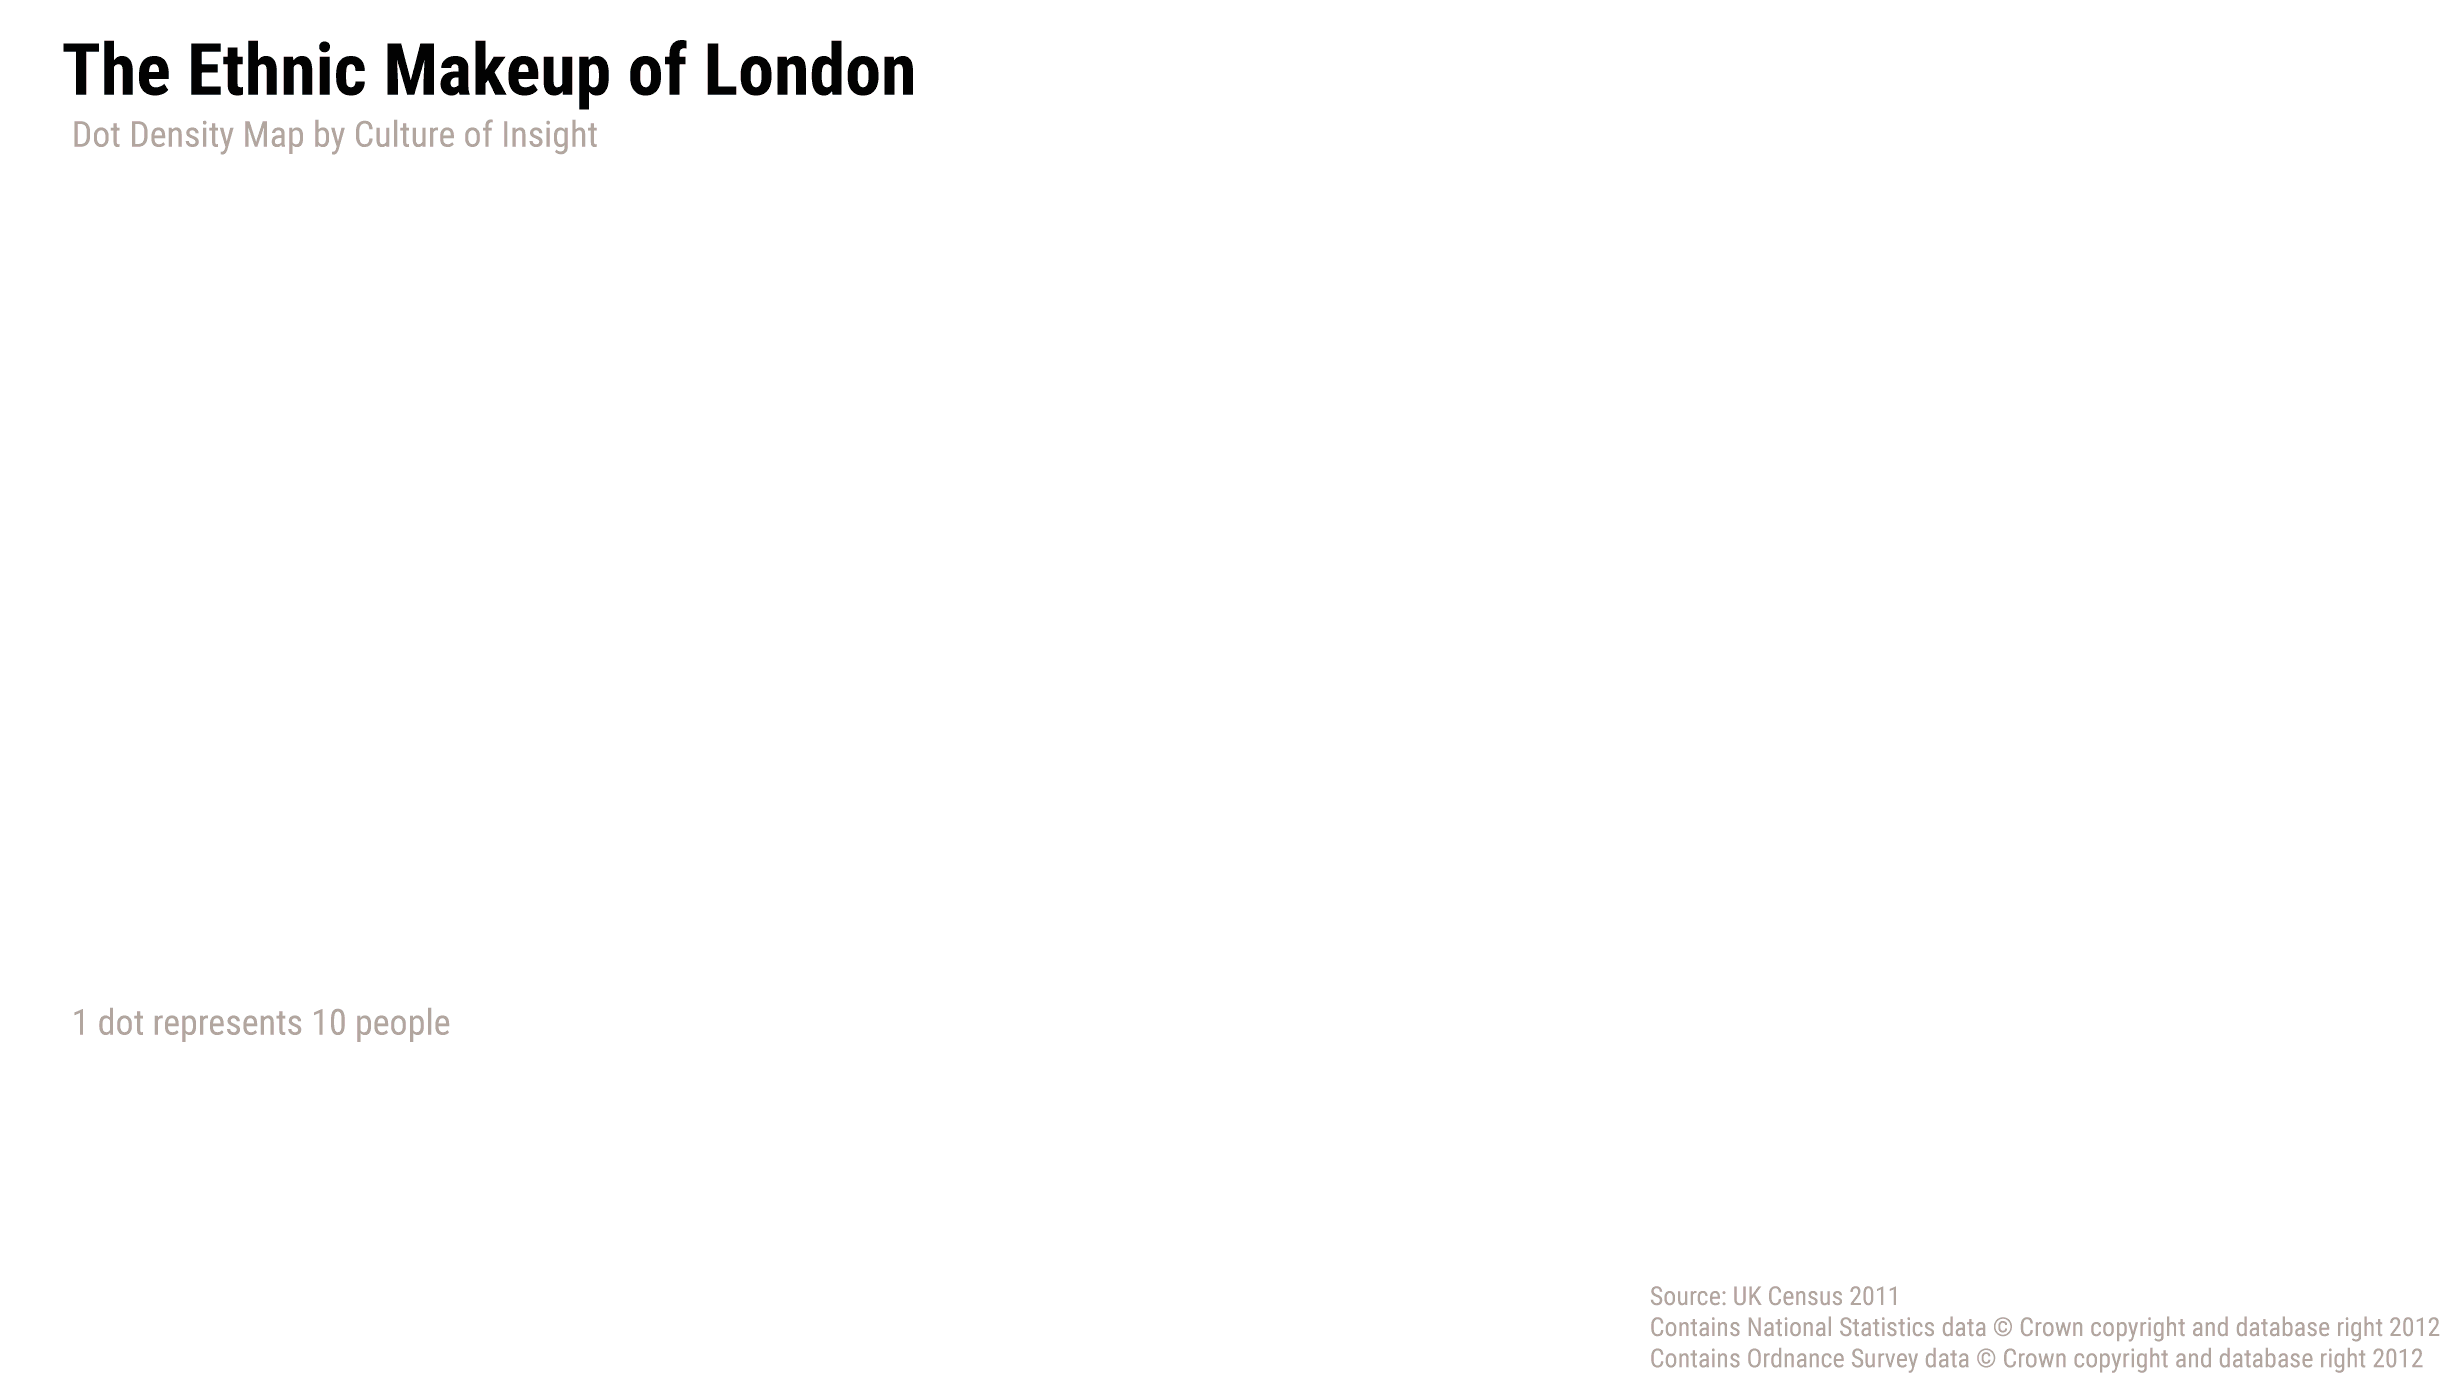 Building Dot Density Maps with UK Census Data in R